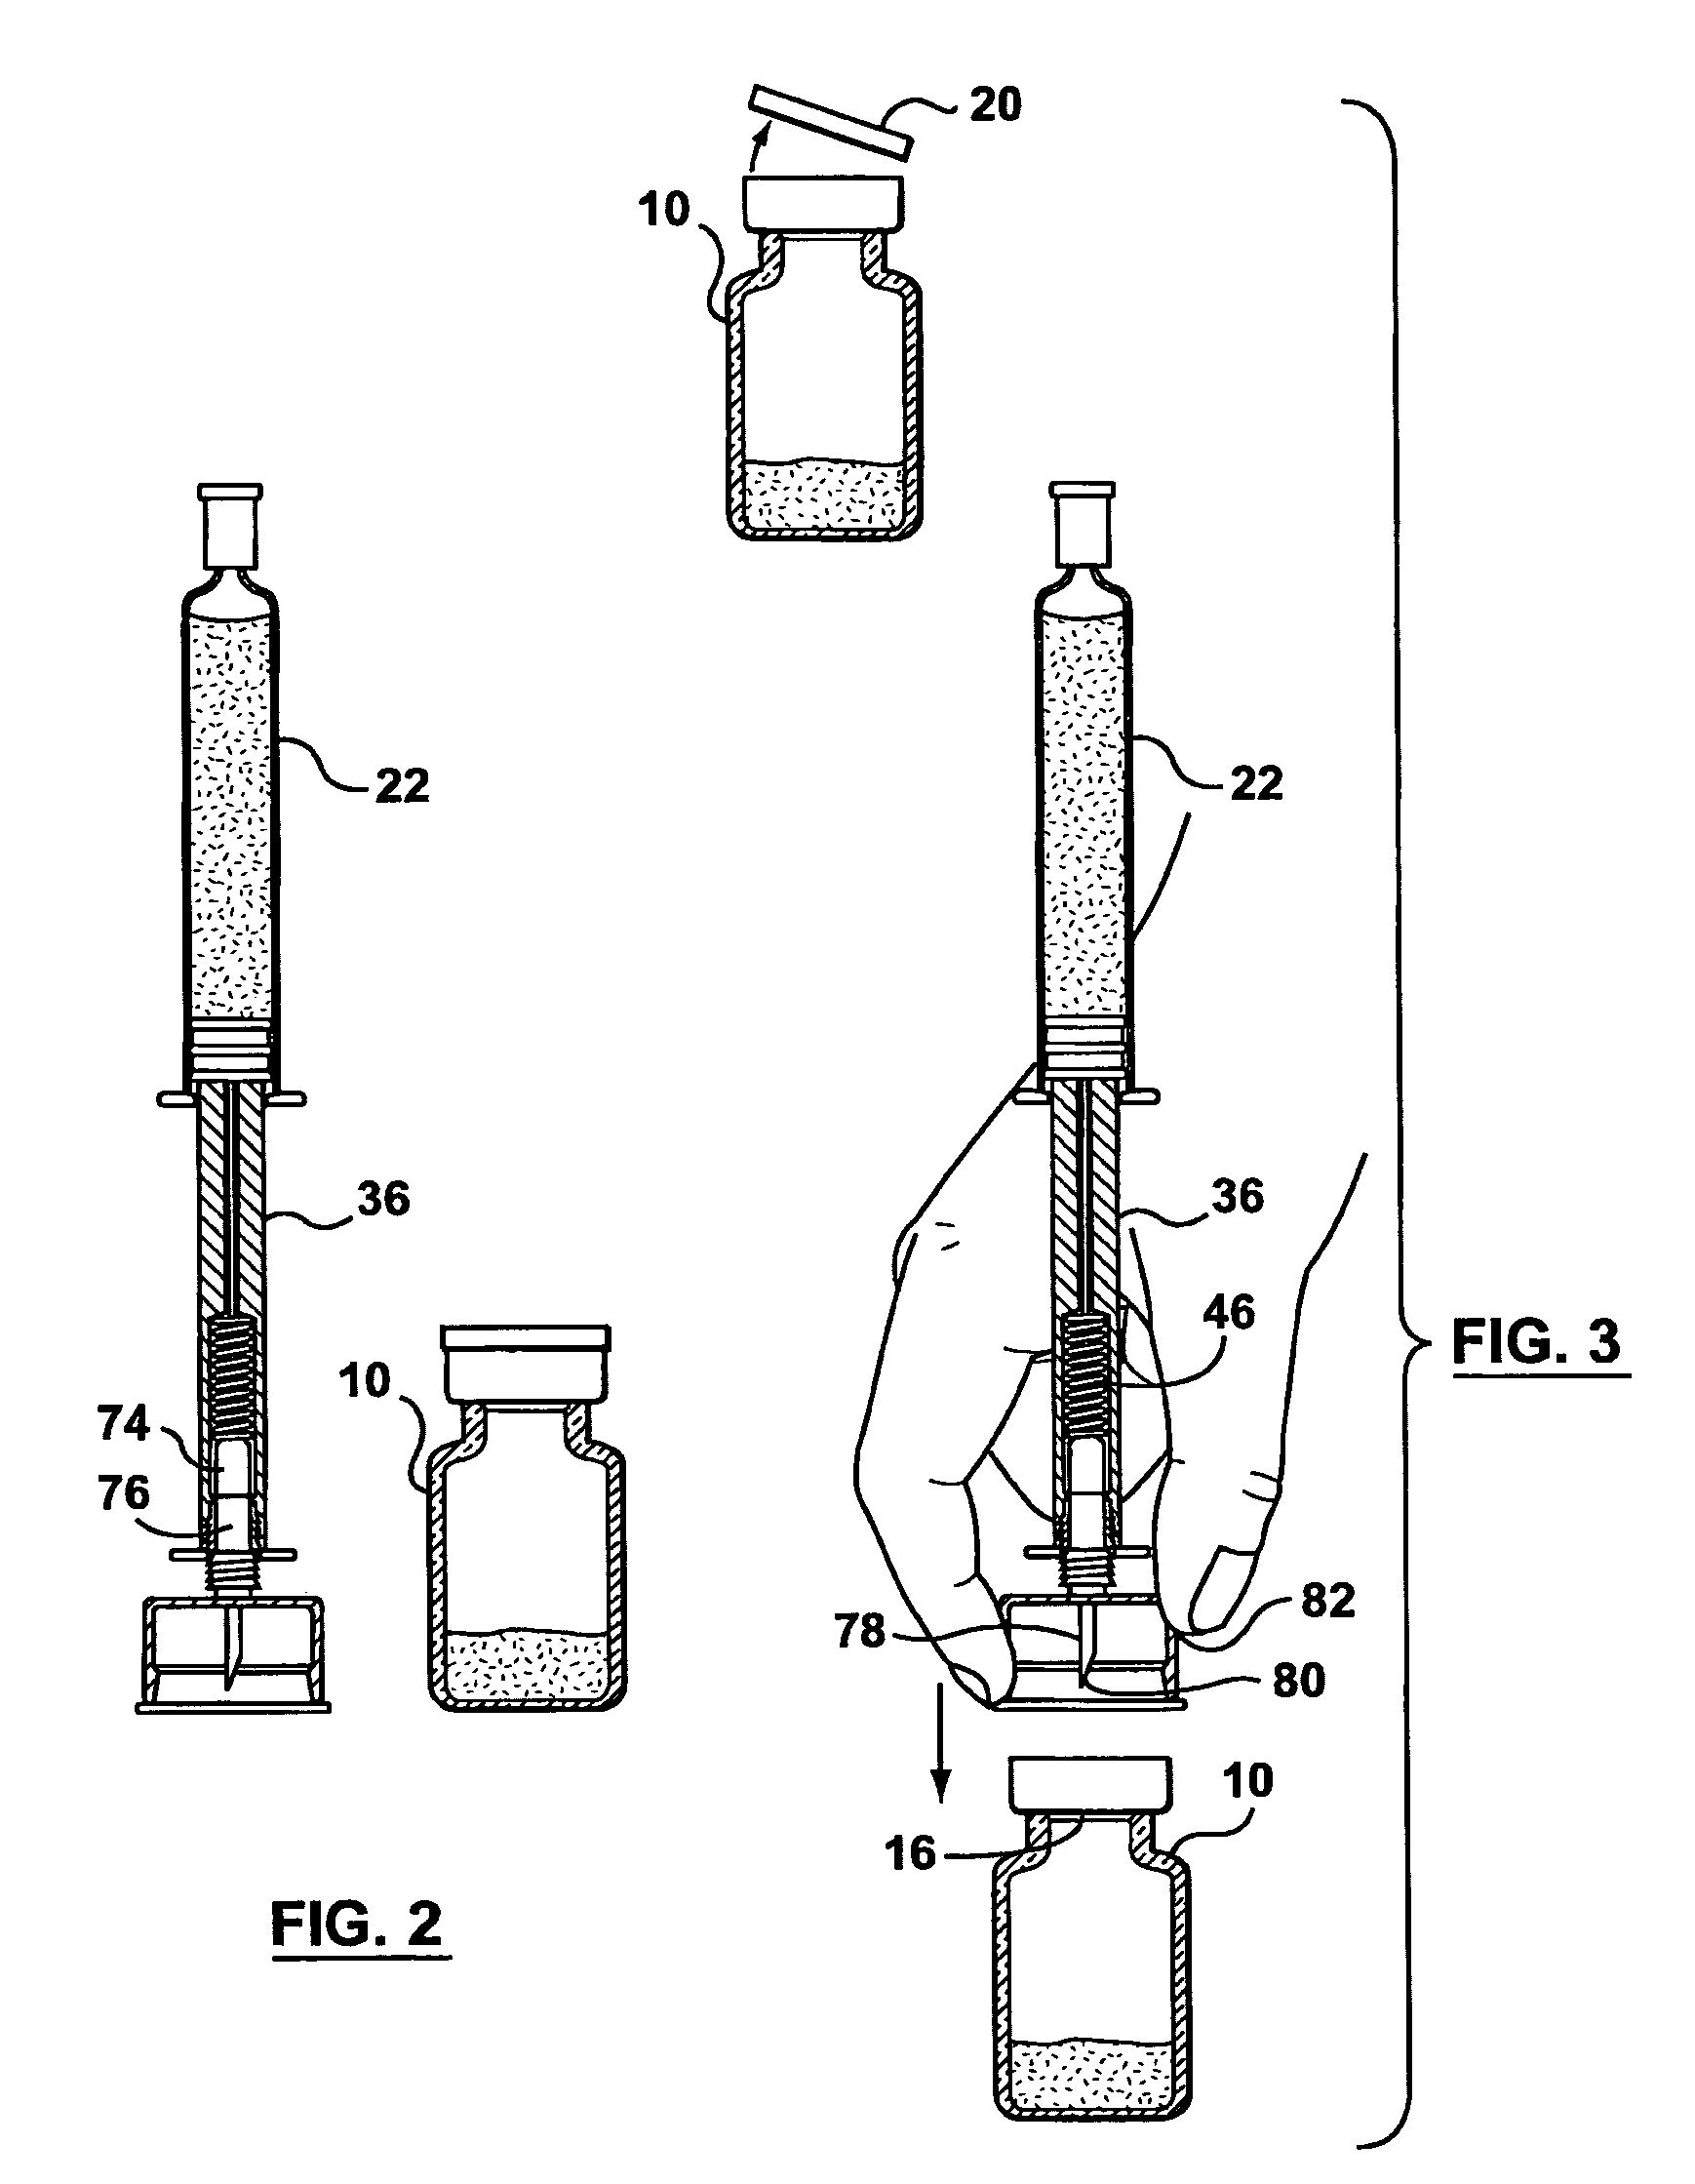 Fluid transfer assembly for pharmaceutical delivery system and method for using same